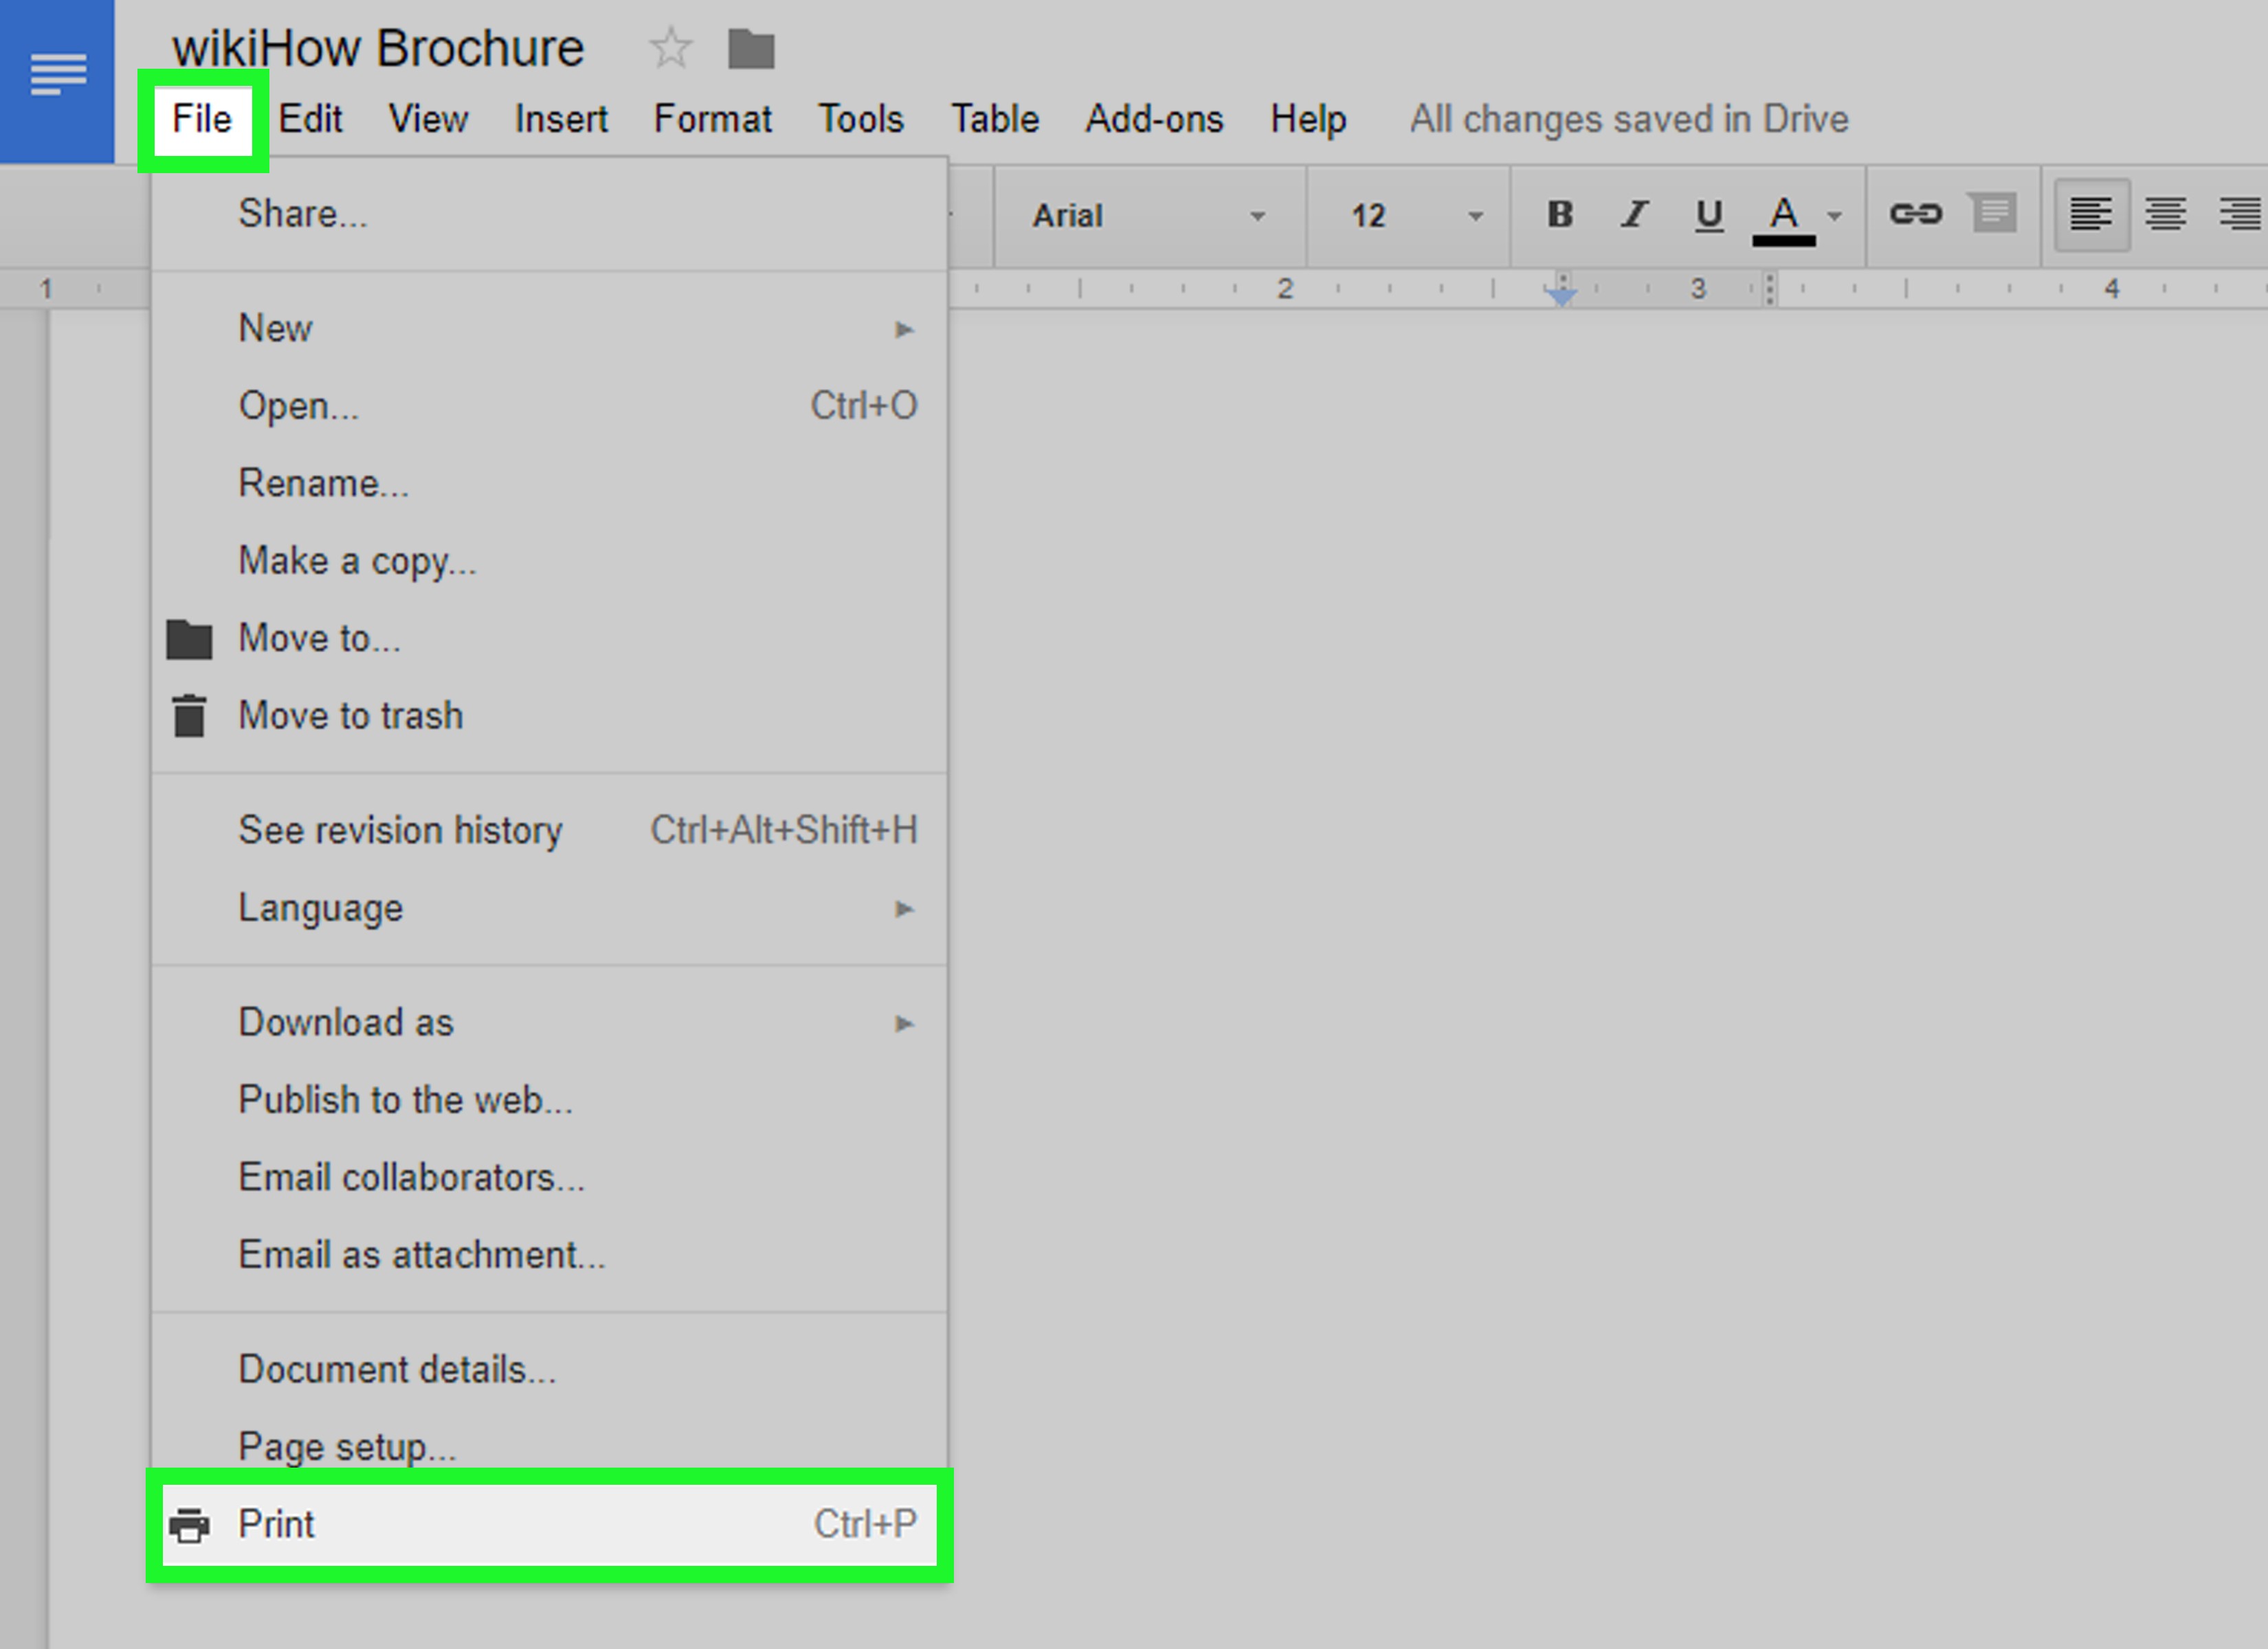 How To Make A Brochure Using Google Docs WikiHow On